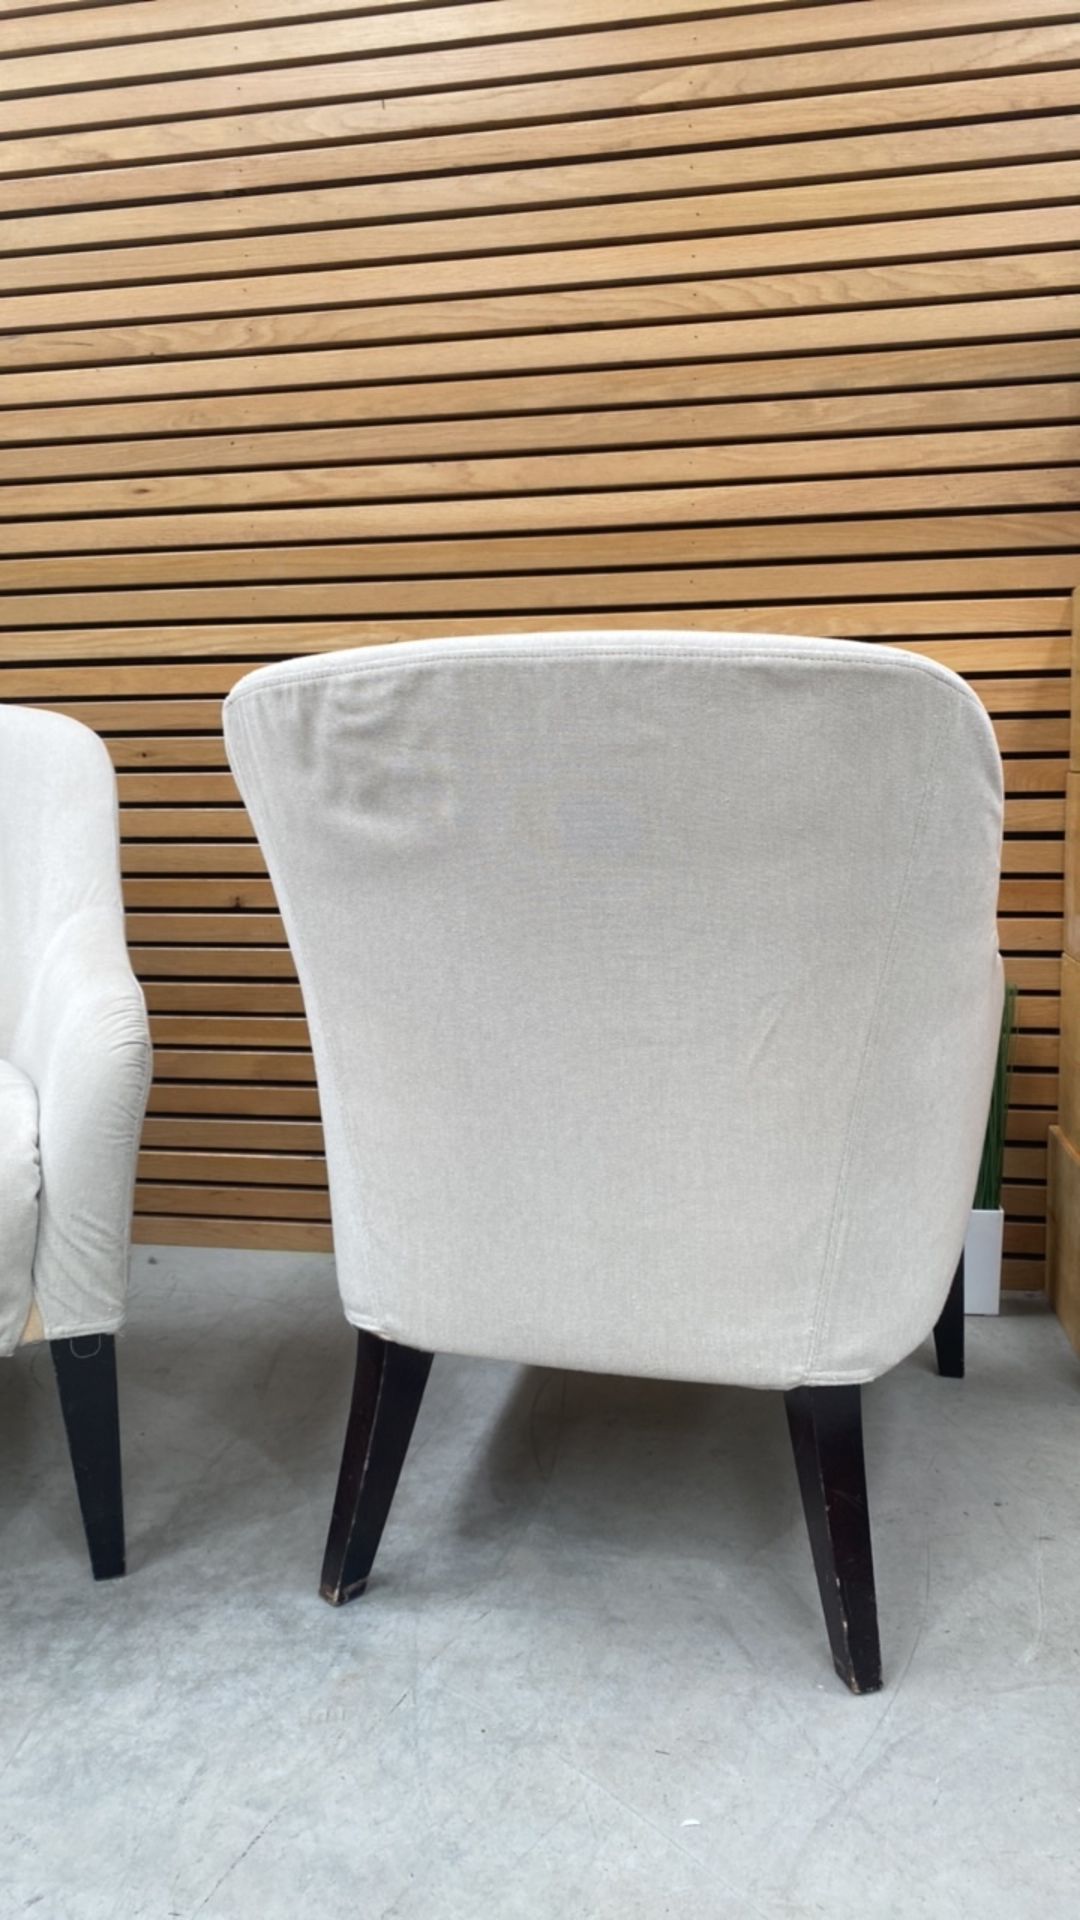 Set Of 2 Cream Upholstered Armchairs - Image 4 of 4